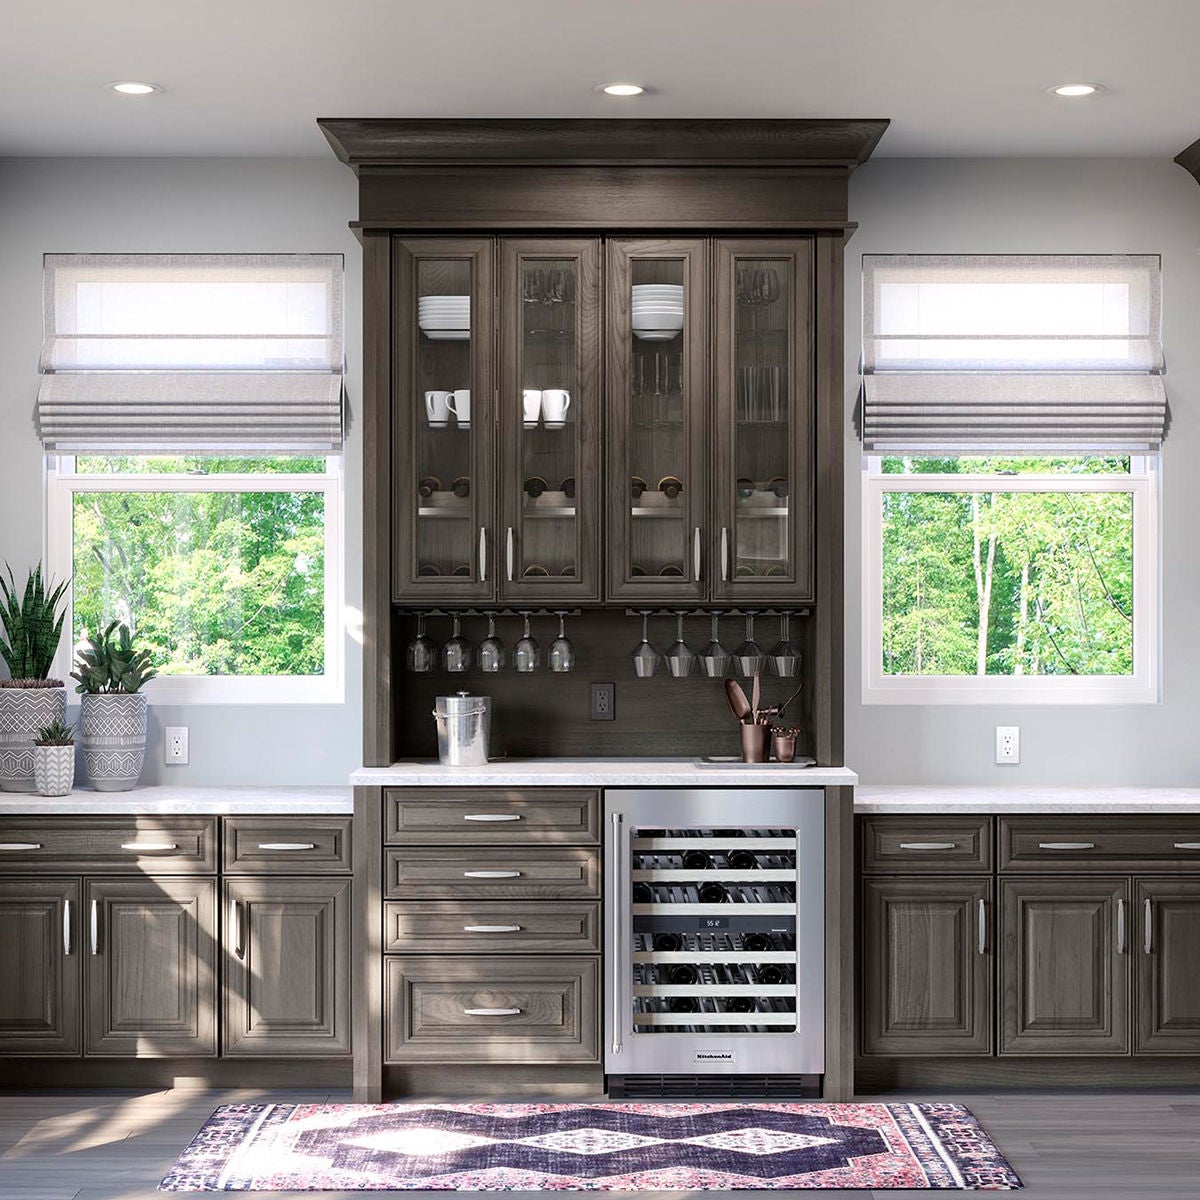 Create A Furniture-Style Look With Kitchen Cabinets